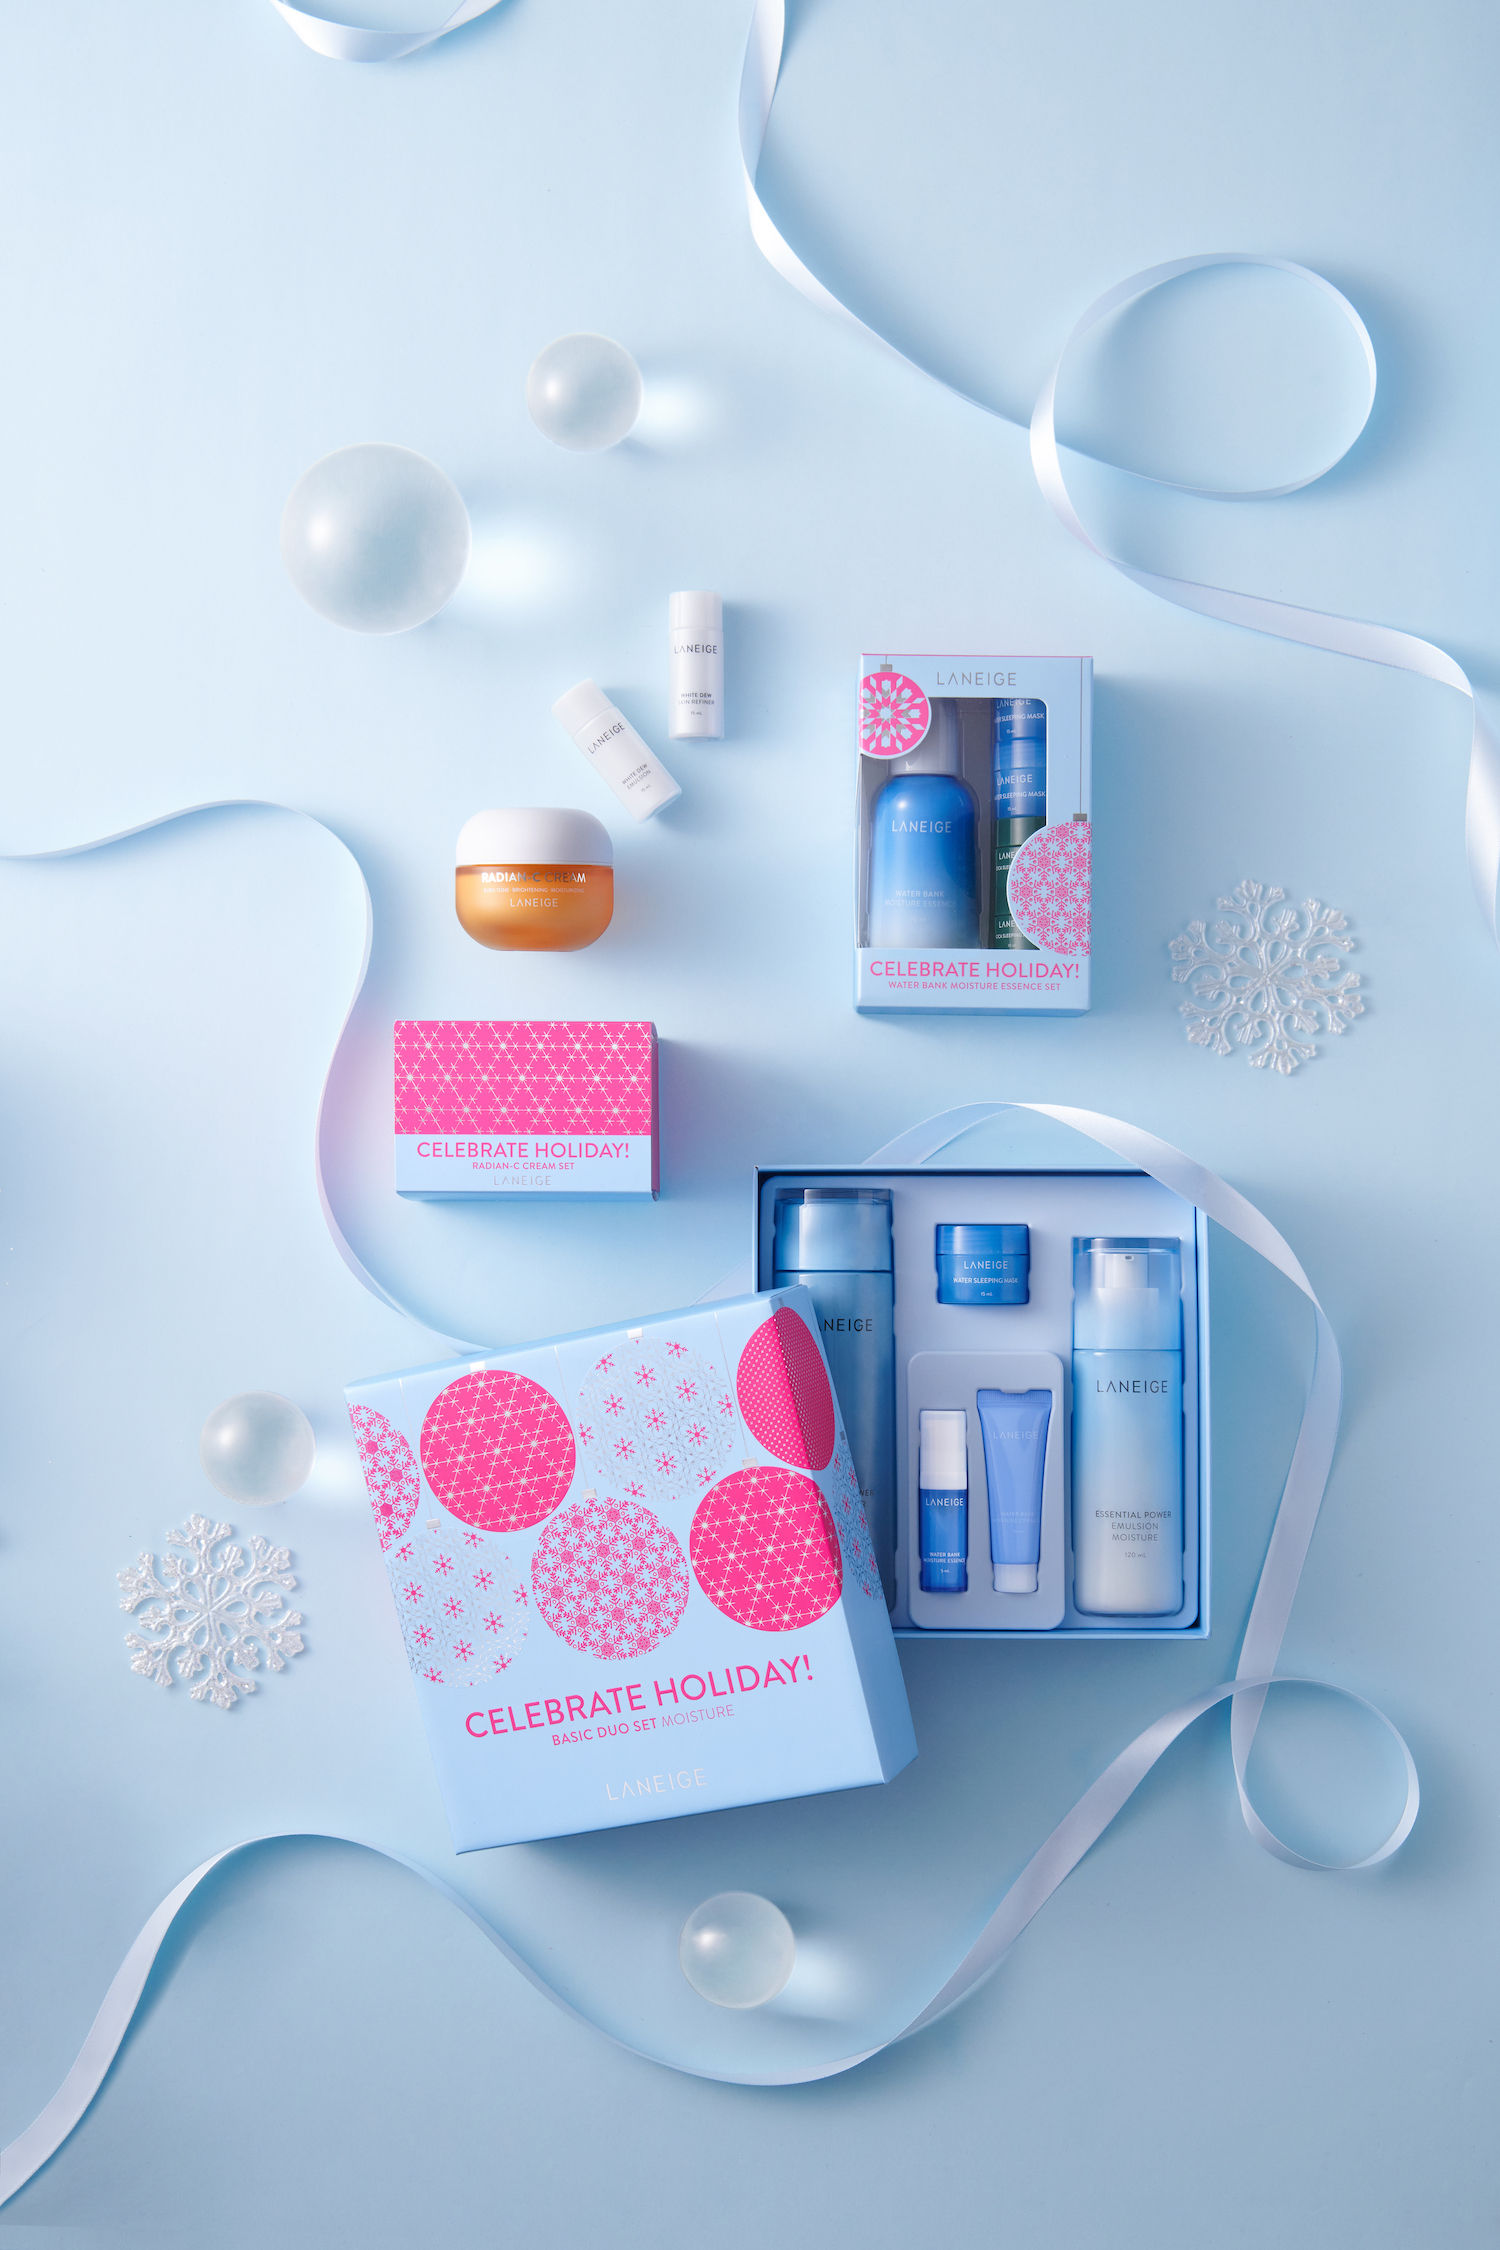 New beauty products for Christmas gifting Makeup, skincare, fragrances